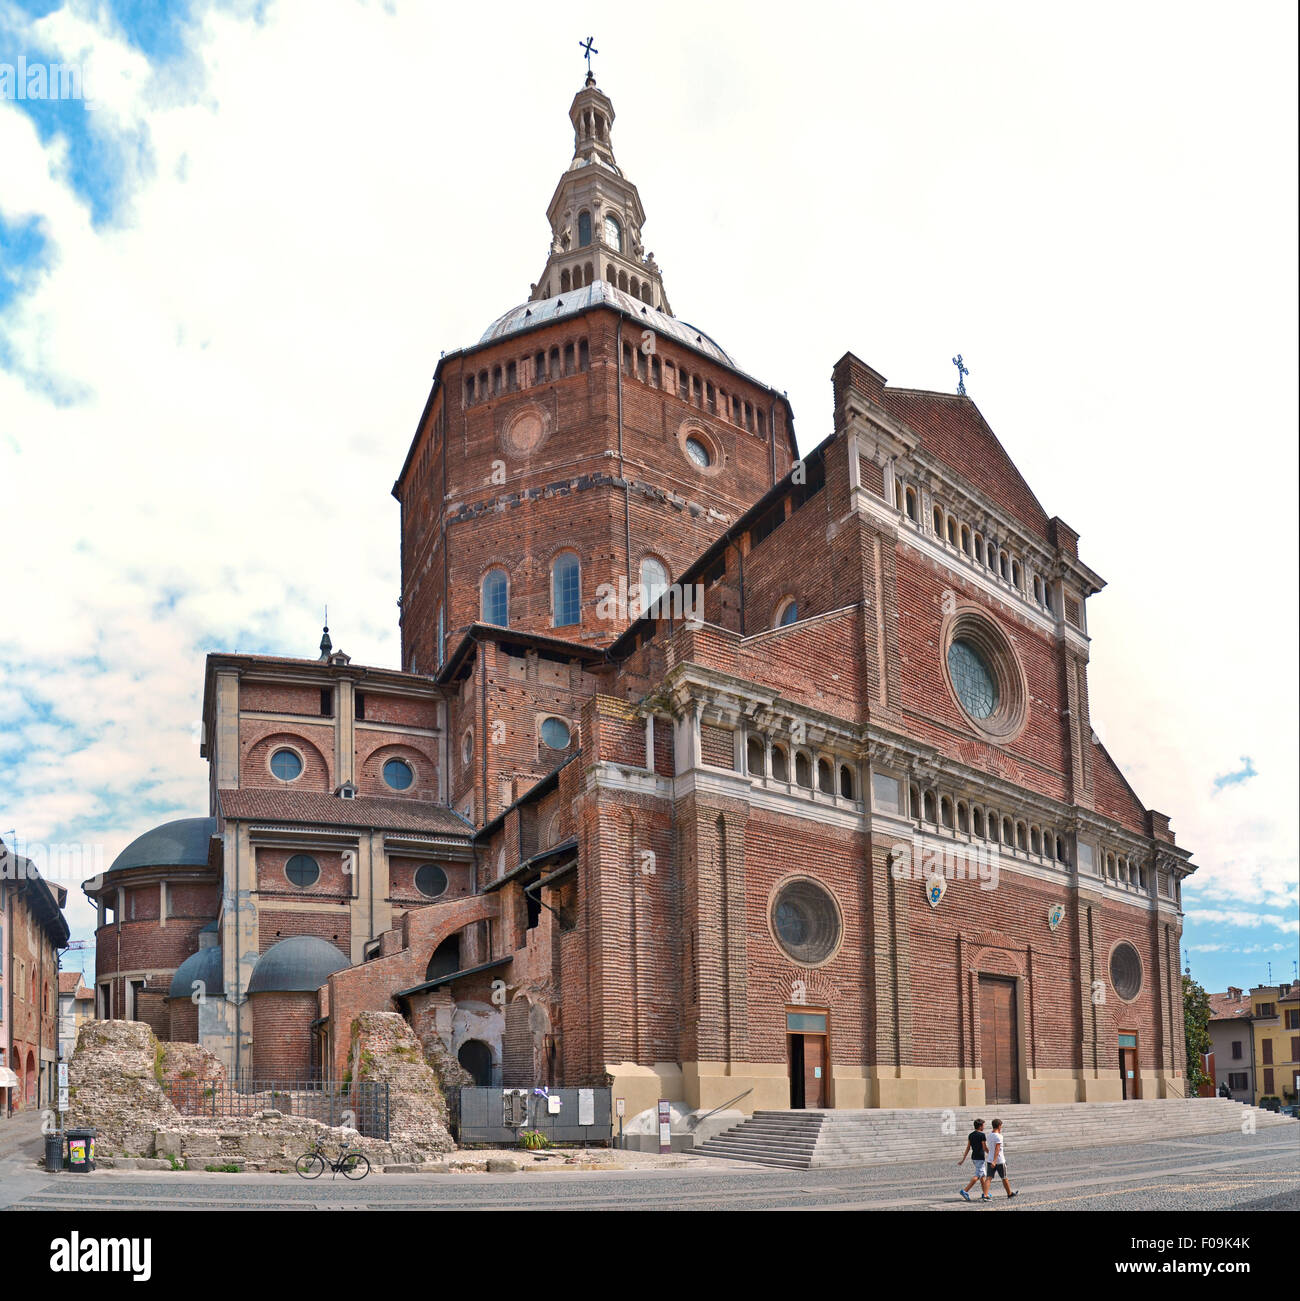 The Cathedral of Pavia (Italian: Duomo di Pavia) is a church in Pavia, Italy. Stock Photo